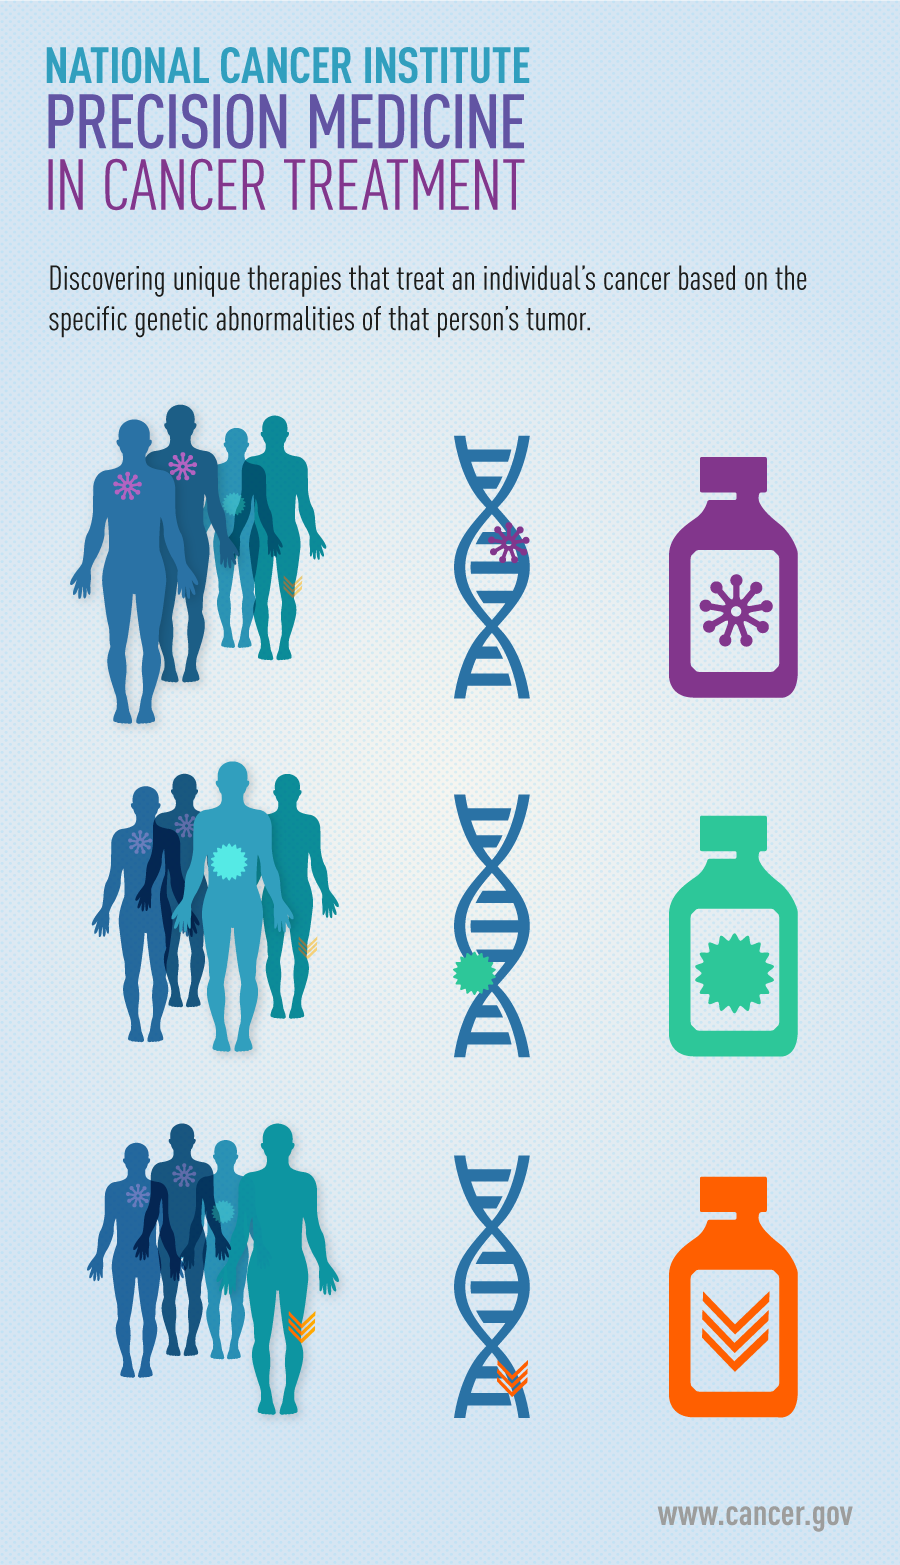 Infographic highlighting precision medicines's role in discovering unique therapies based on specific genetic abnormailities in tumors.